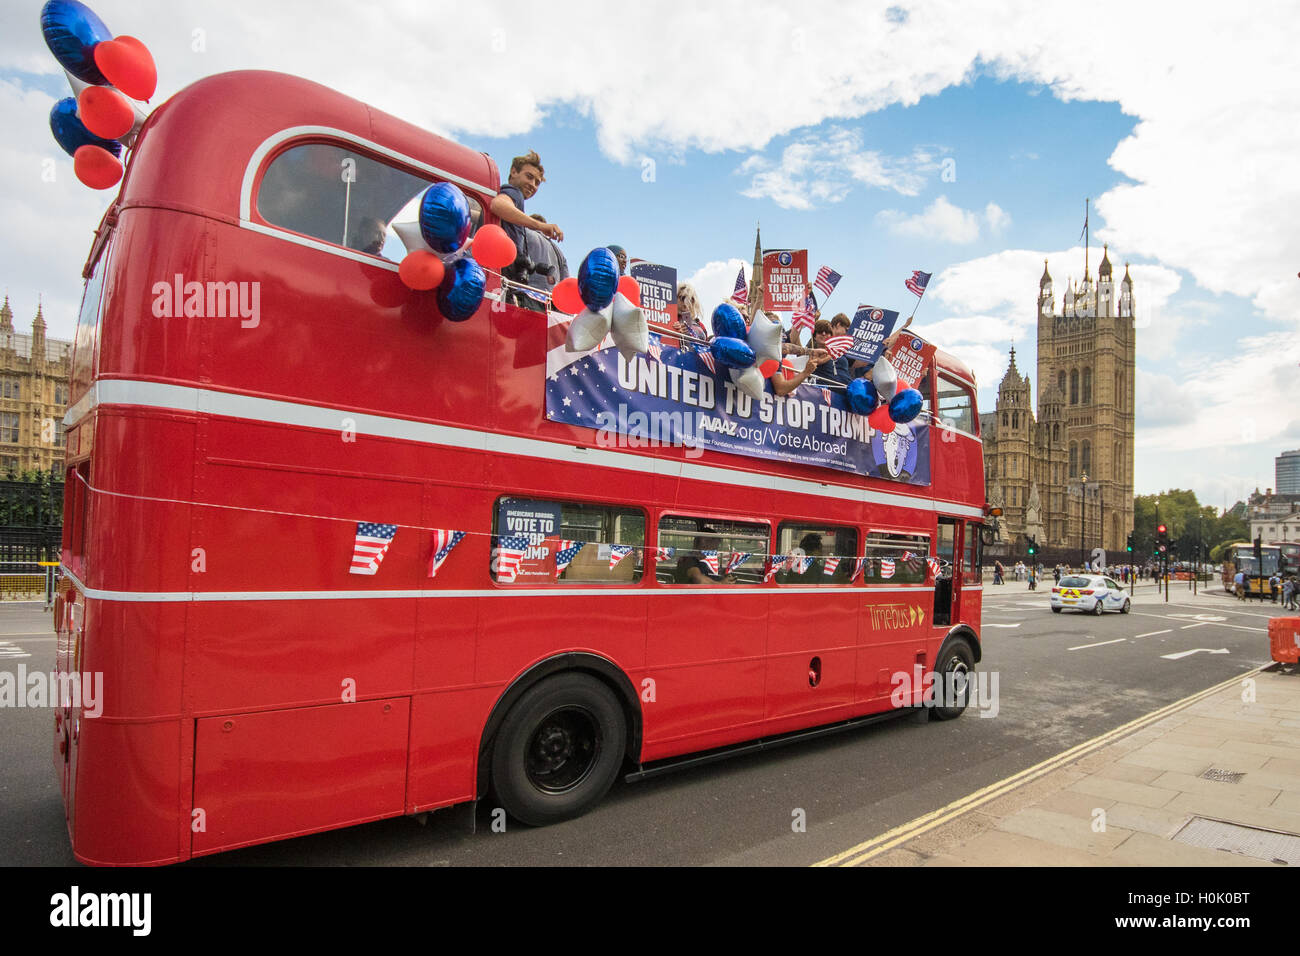 London, UK. 21st Sep, 2016. London, September 21st 2016. A "Stop Trump" open topped red London double-decker bus passes the Houses of Parliament and Big Ben in London in a bid to encourage US expats to register to vote in the Presidential election, expecting the majority of them to be more inclined to support Hilary Clinton. Credit:  Paul Davey/Alamy Live News Stock Photo